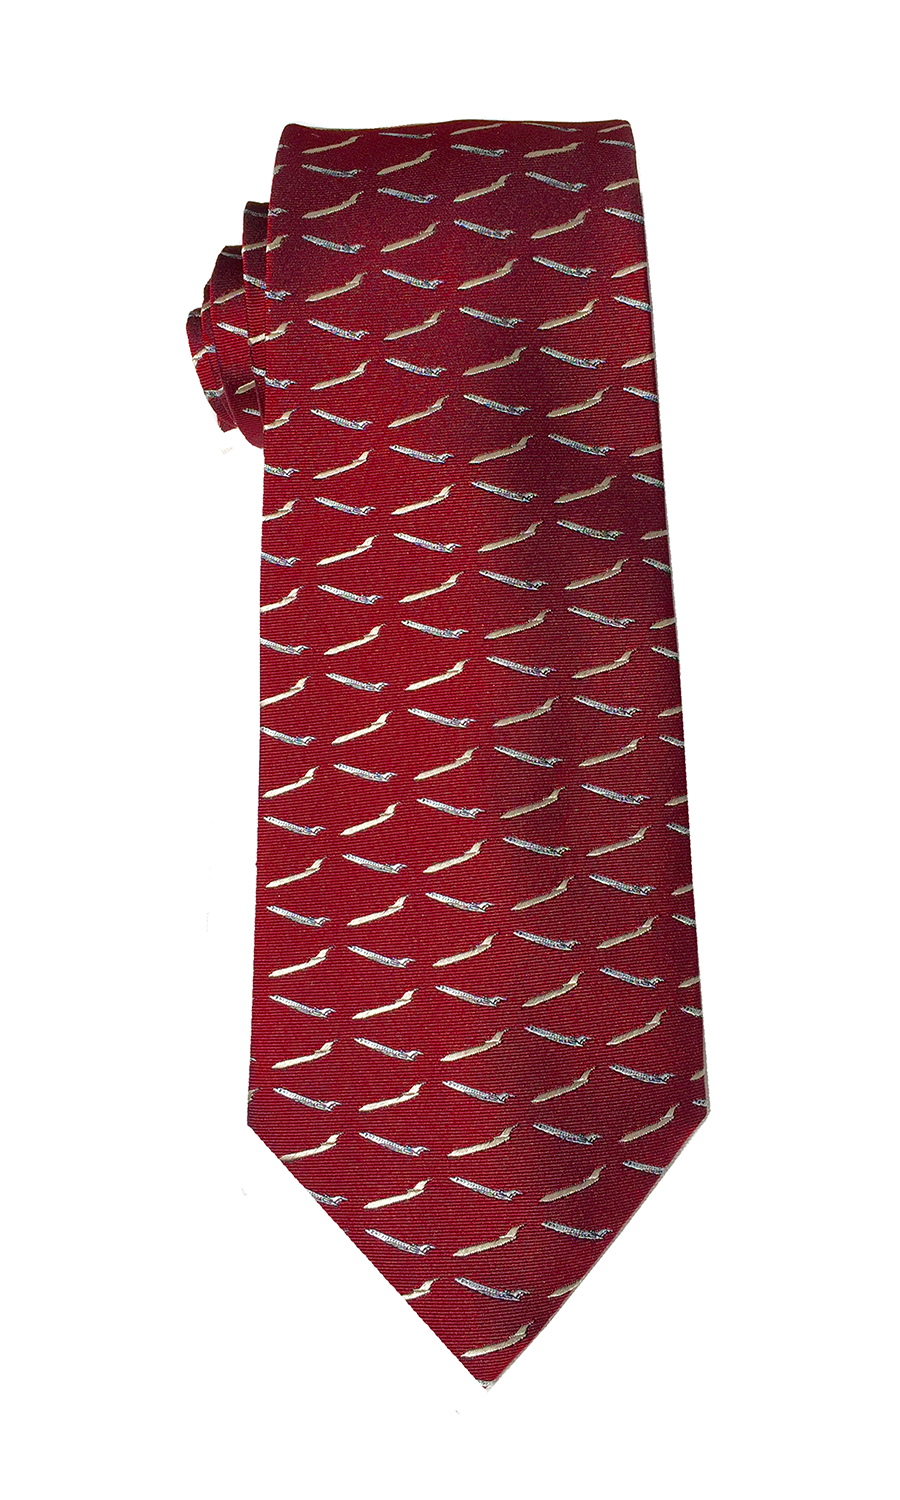 Boeing 727 airliner tie in red